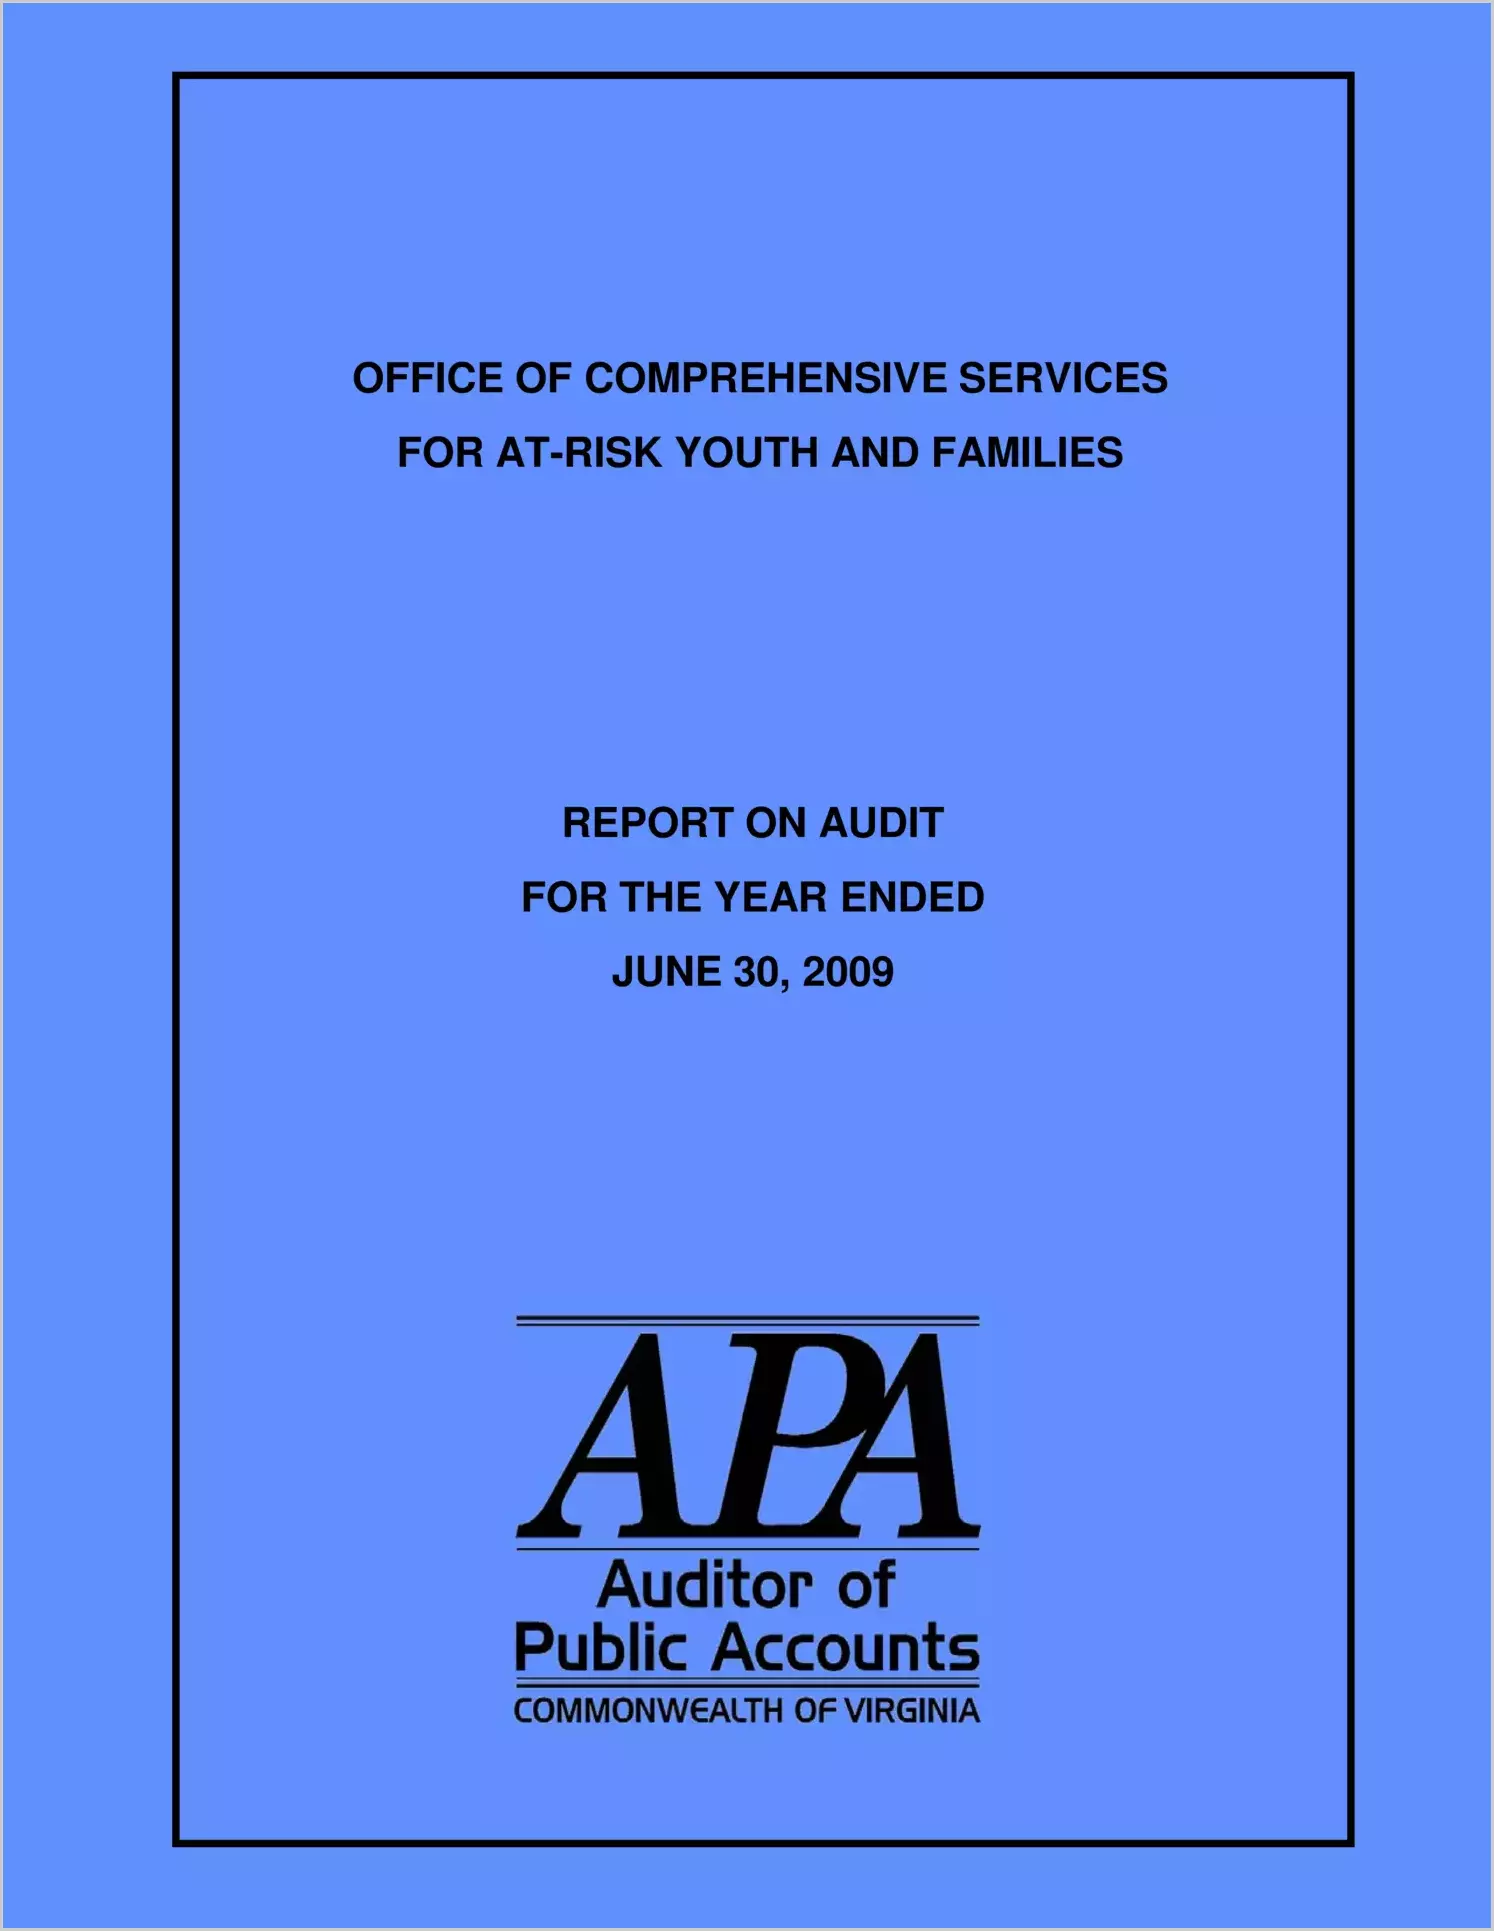 Office of Comprehensive Services for At-Risk Youth and Families for the year ended June 30, 2009